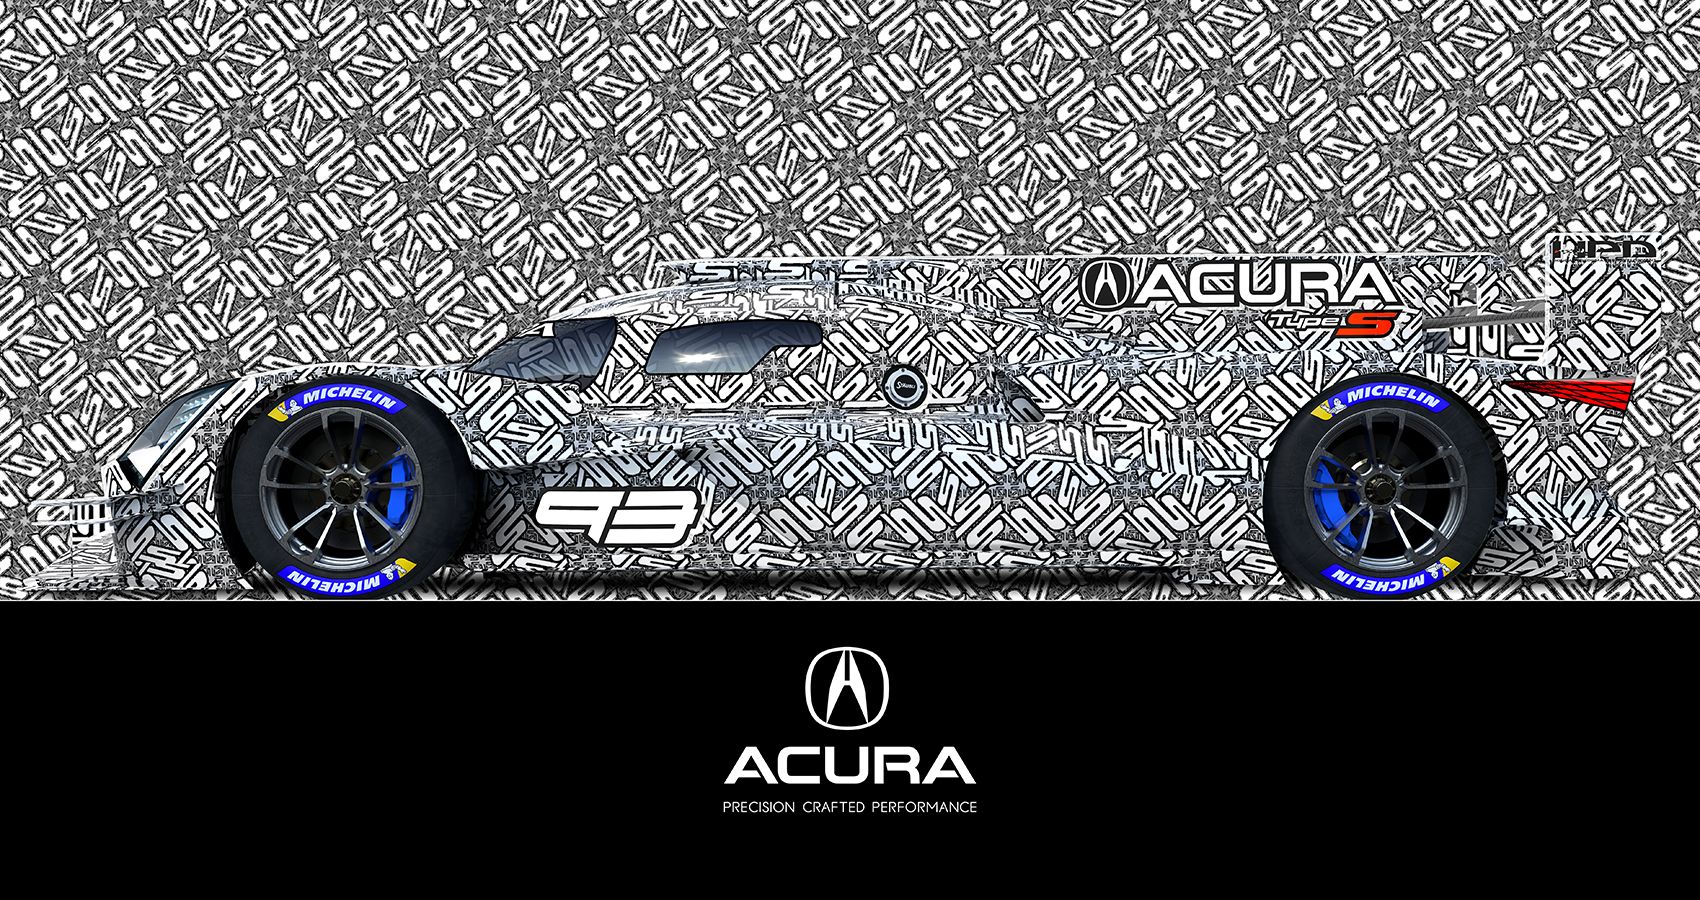 Acura ARX-06 LMDh side view, black and white camouflage, black and white background